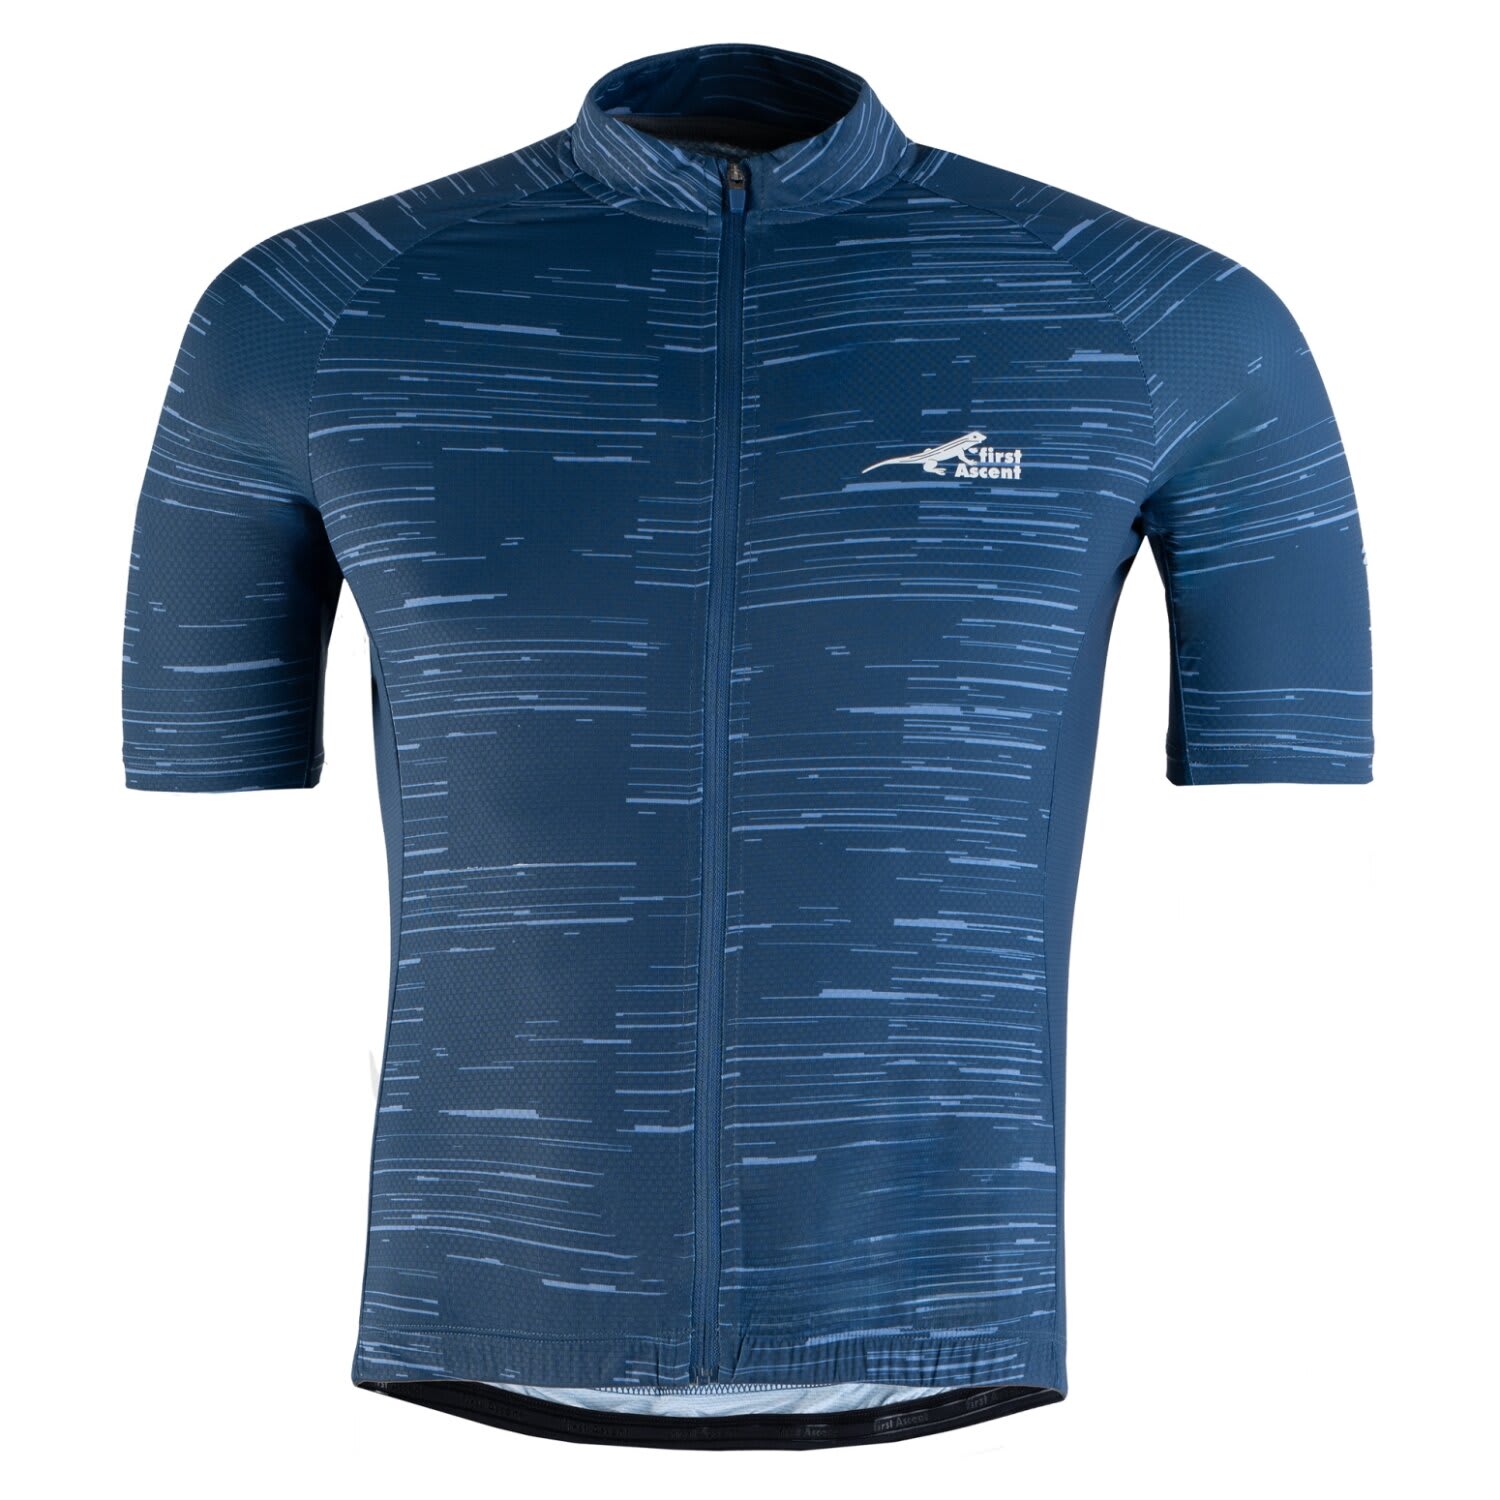 First Ascent Men's Classic Tour Cycling Jersey